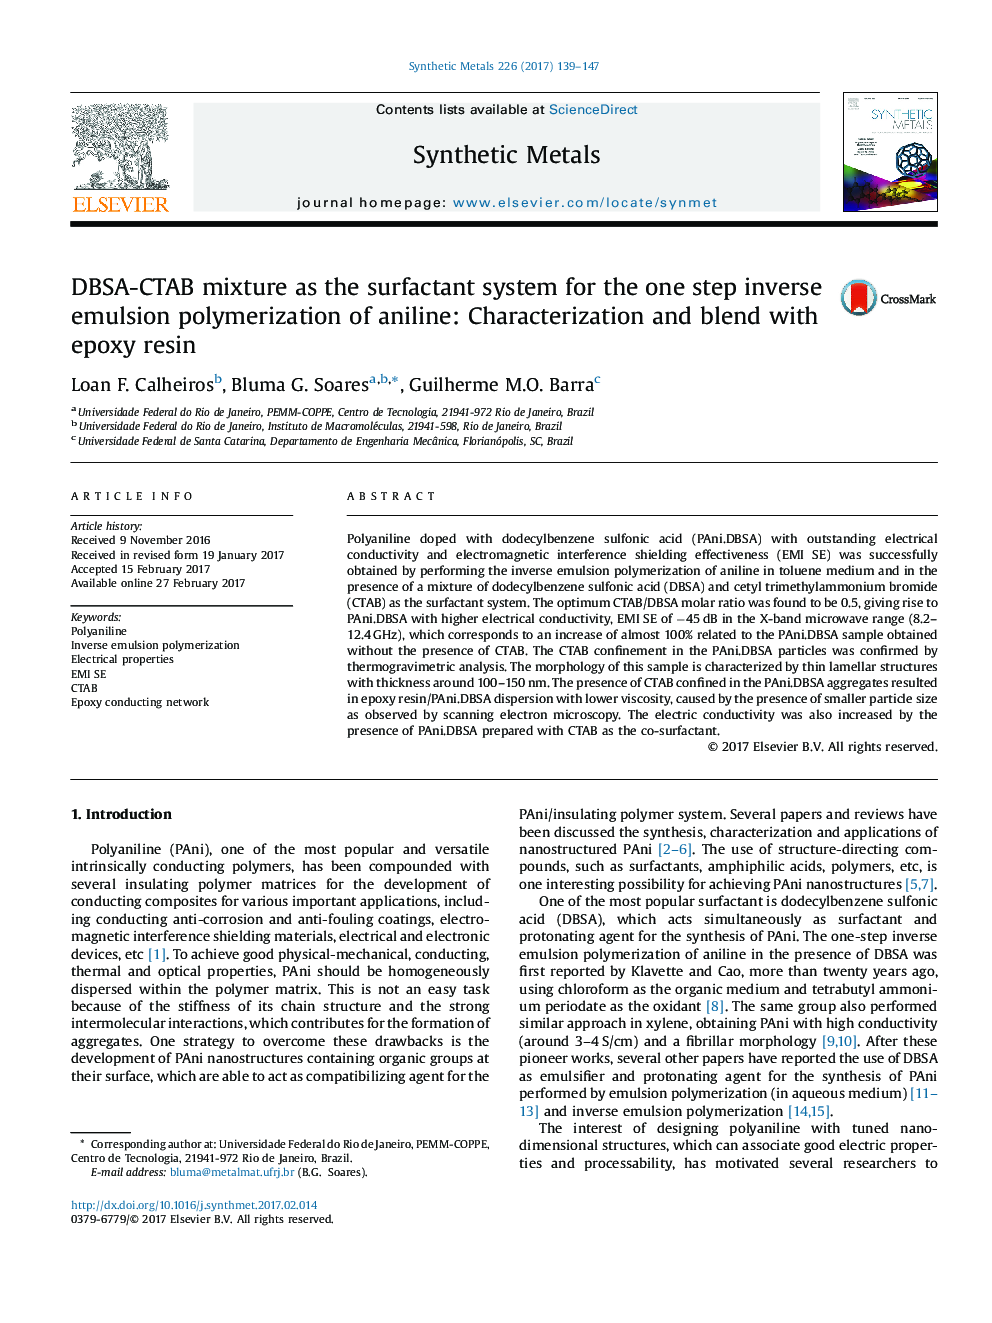 DBSA-CTAB mixture as the surfactant system for the one step inverse emulsion polymerization of aniline: Characterization and blend with epoxy resin